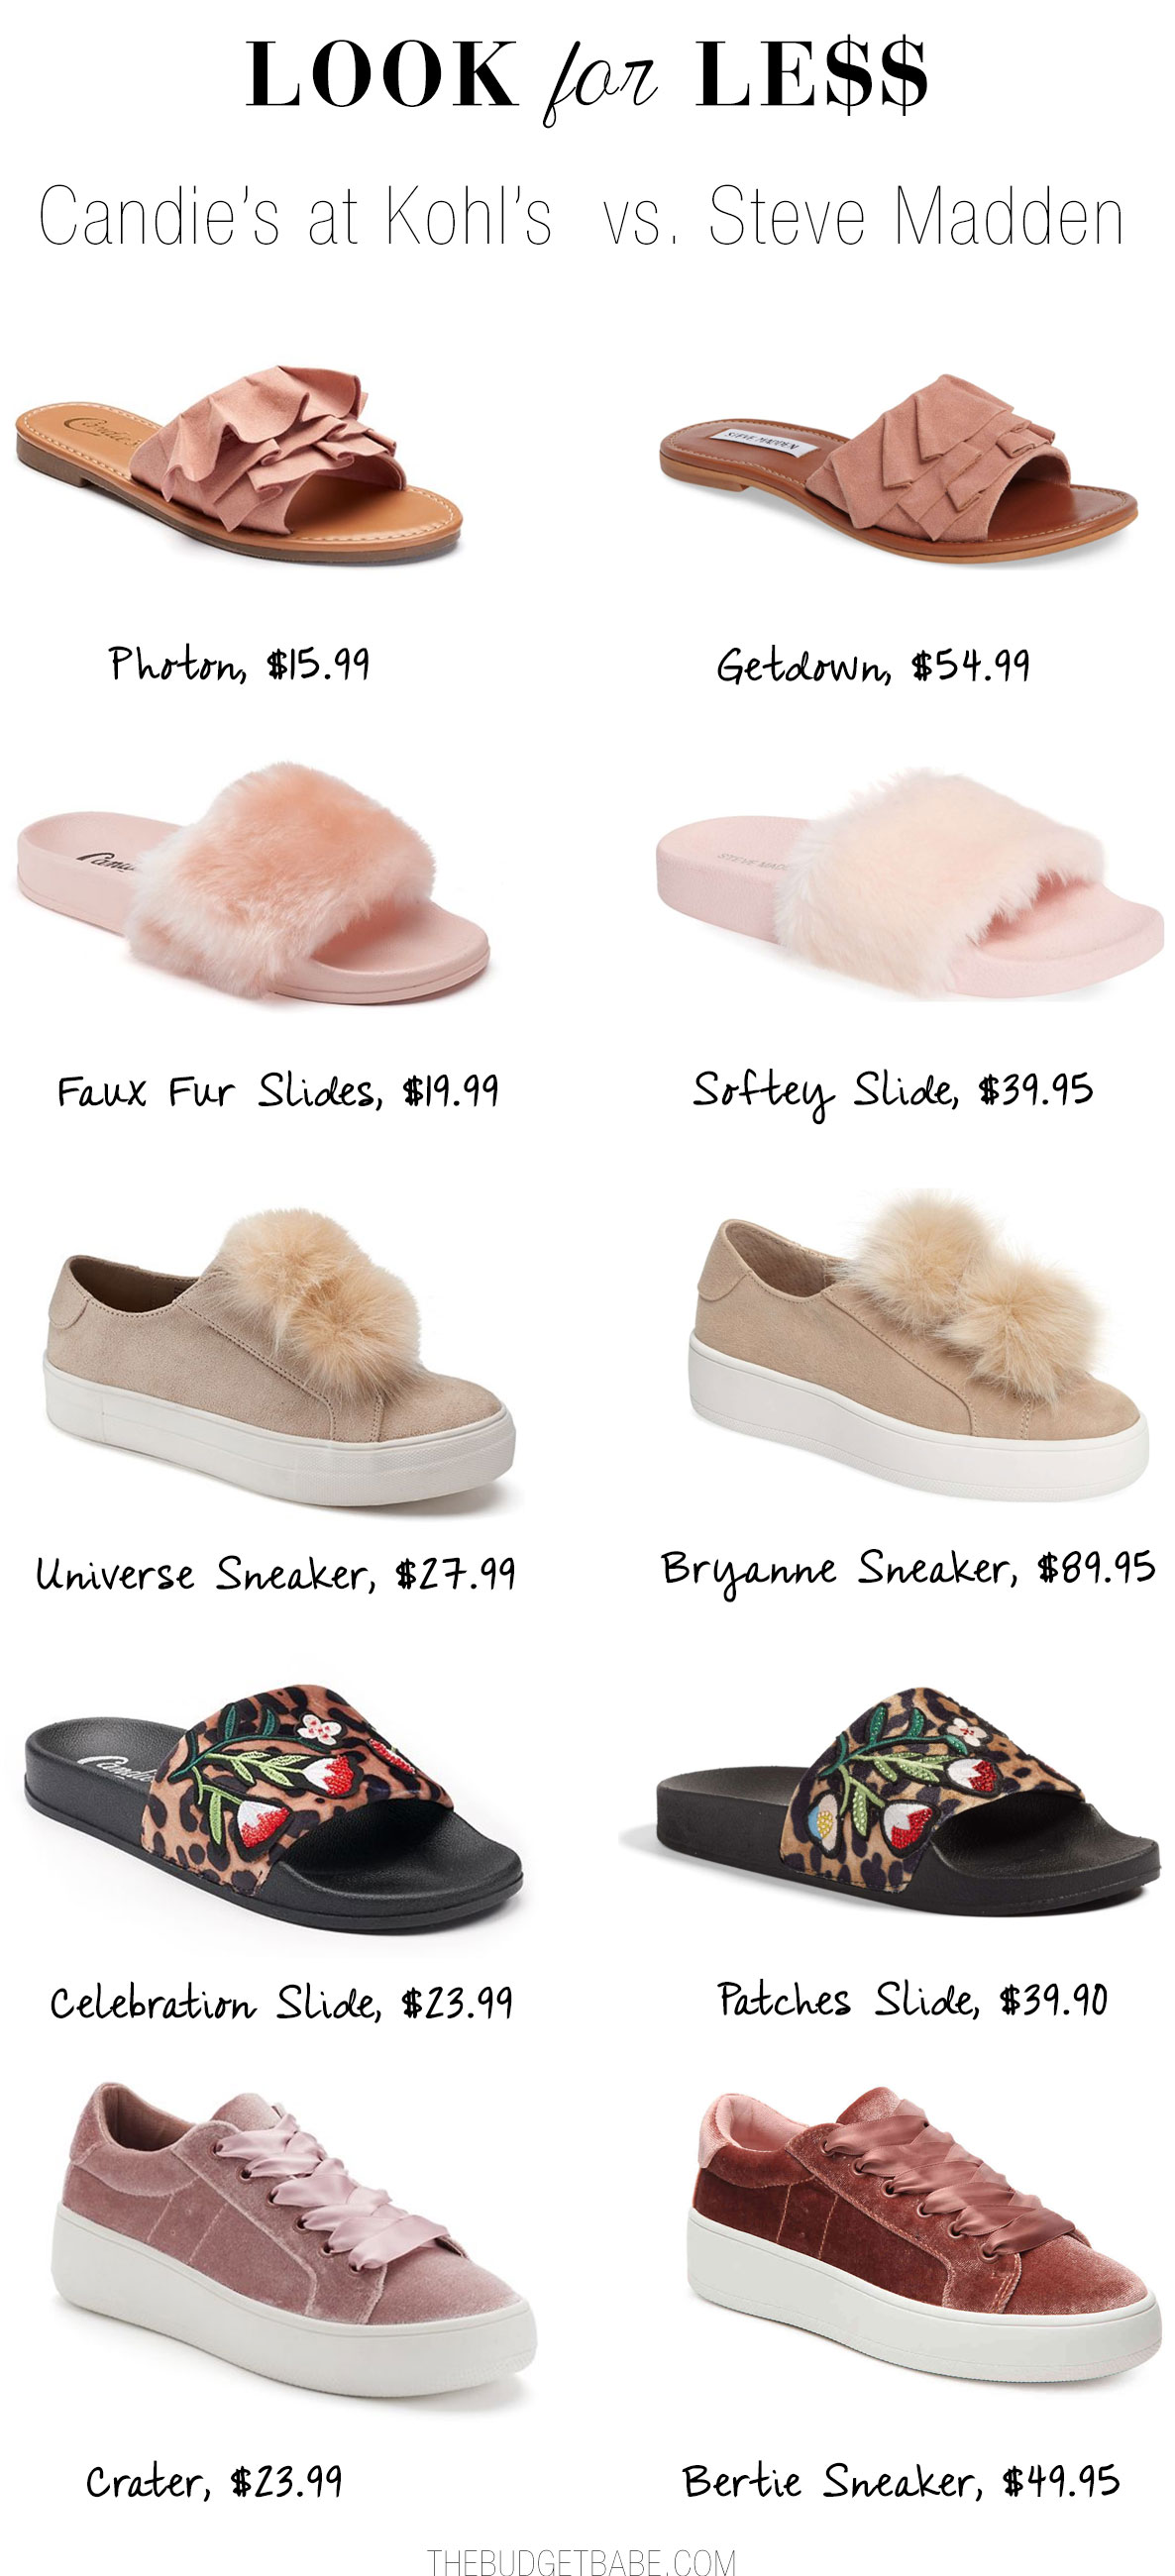 You can find the Steve Madden look for less under different labels.